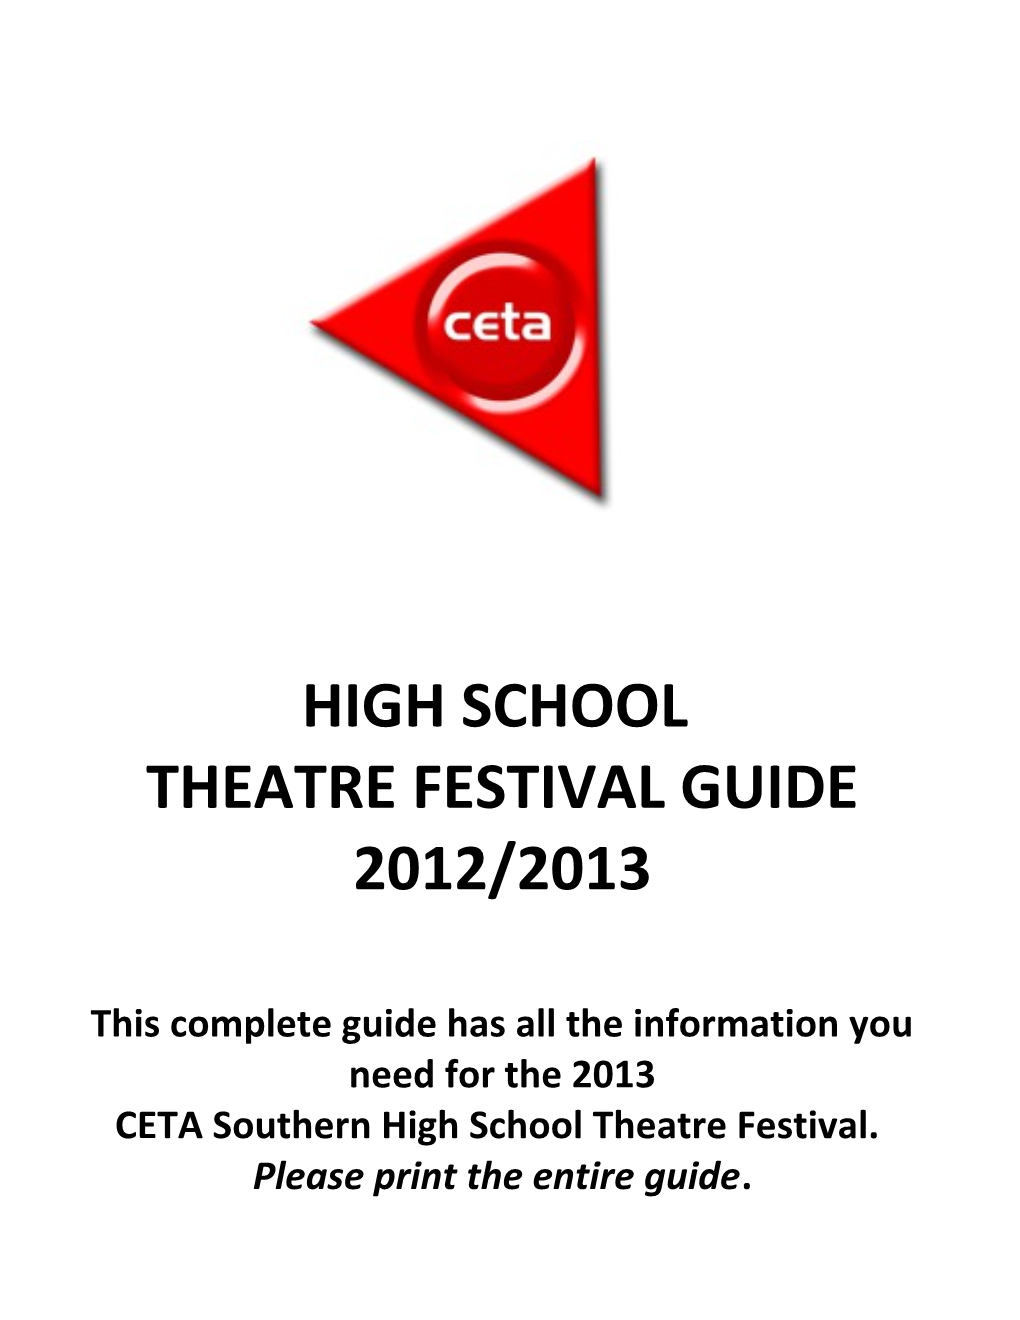 This Complete Guide Has All the Information You Need for the 2013